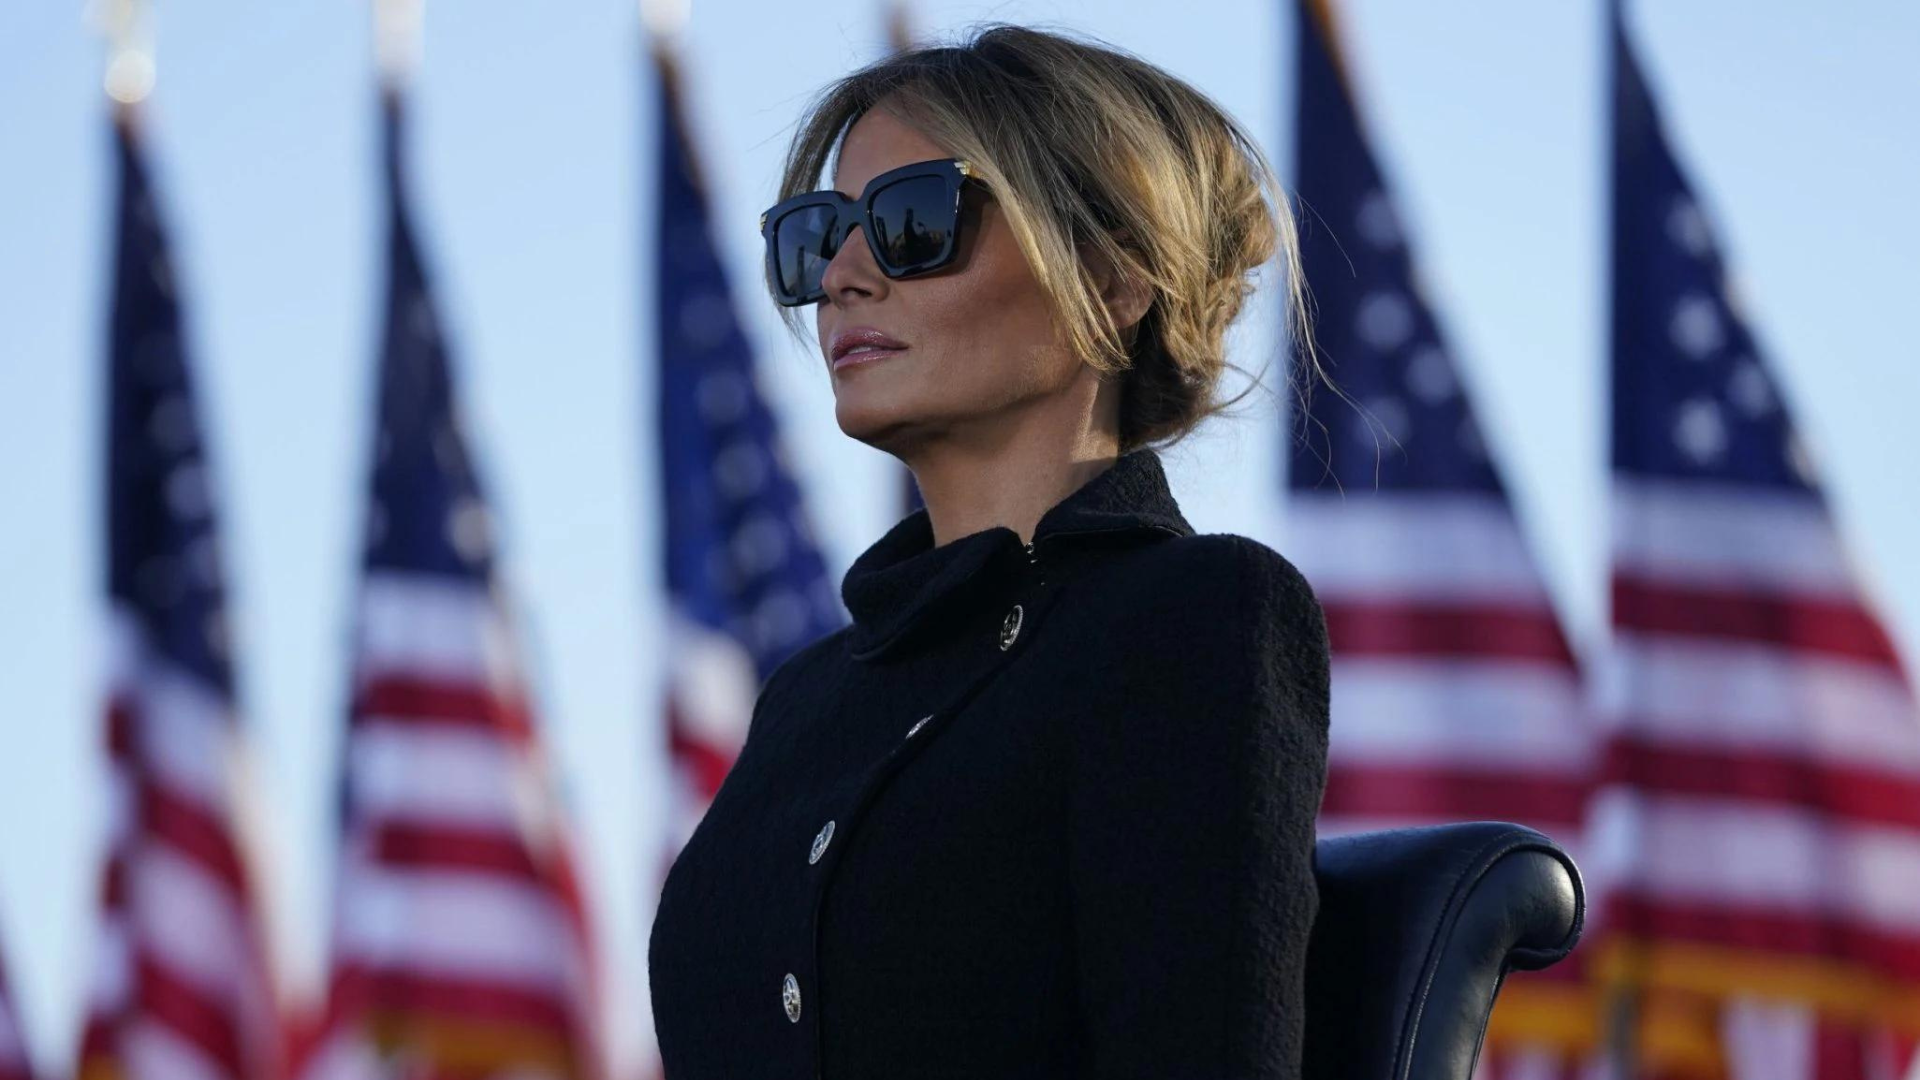 A Picture of Melania Trump, who recently launched a new NFT collection, standing in front of a row of american flags